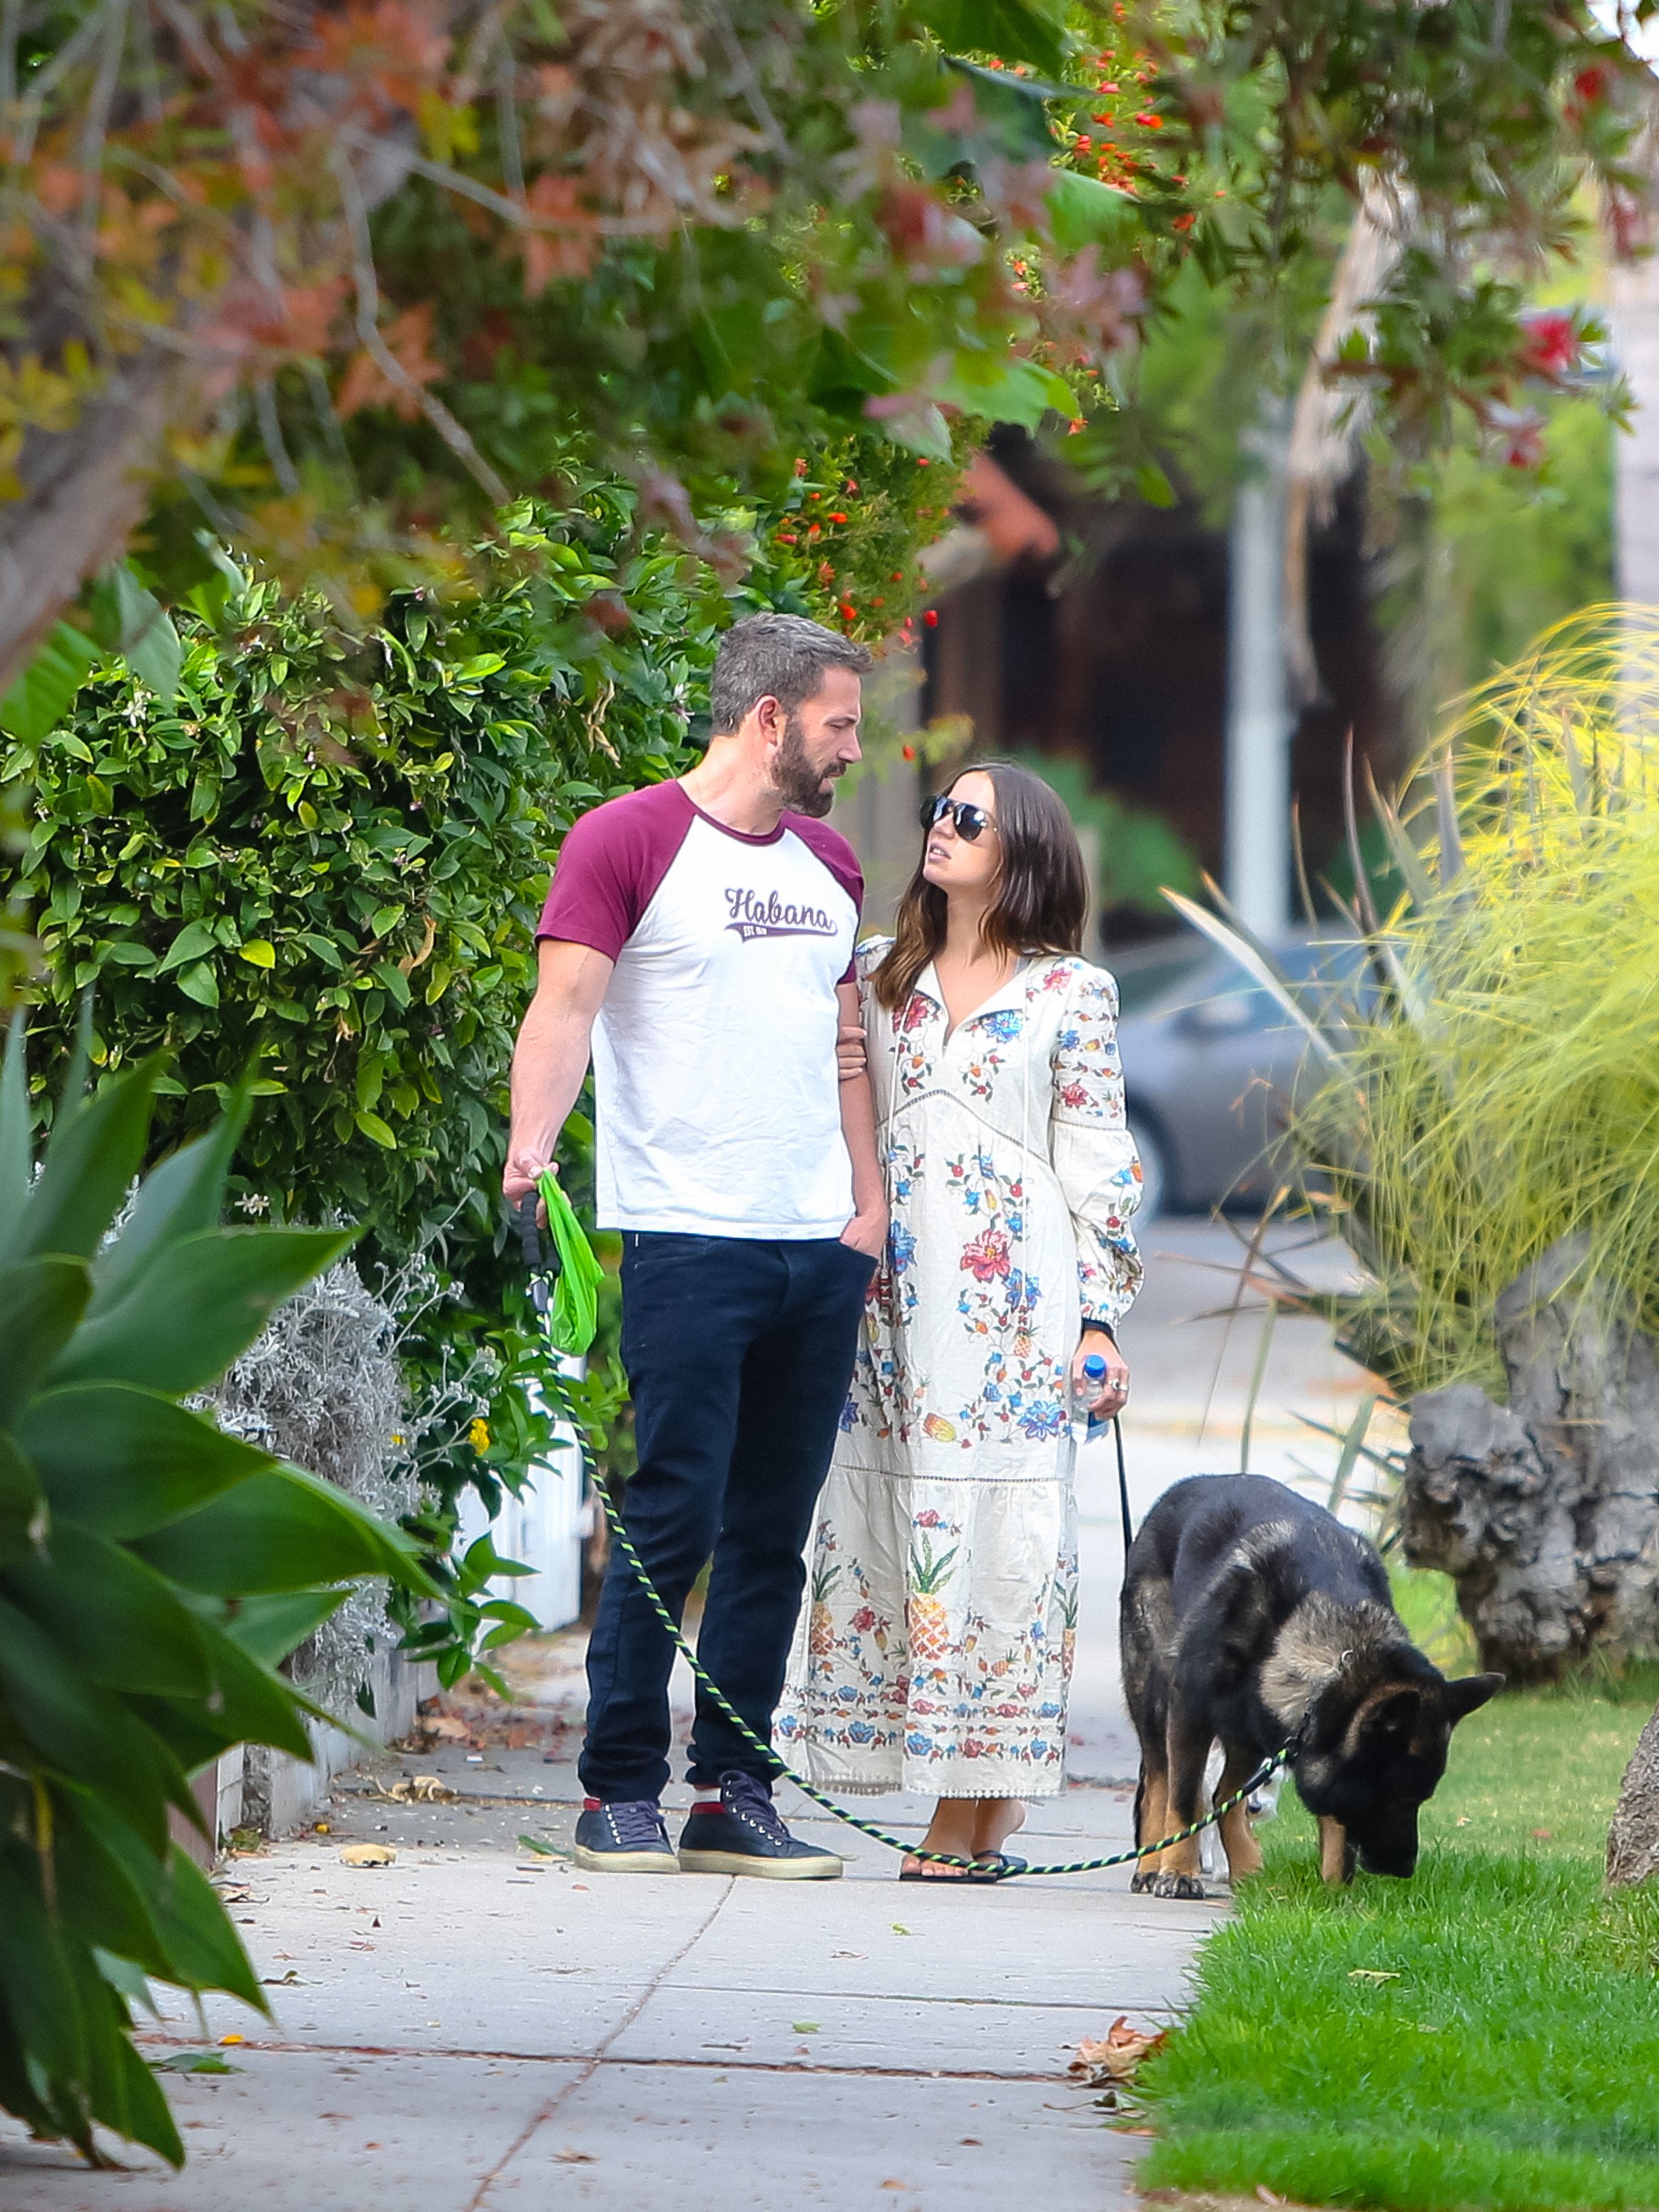 Ben Affleck and Ana de Armas walking on the sidewalk on June 30, 2020, in Los Angeles, California. | Source: Getty Images